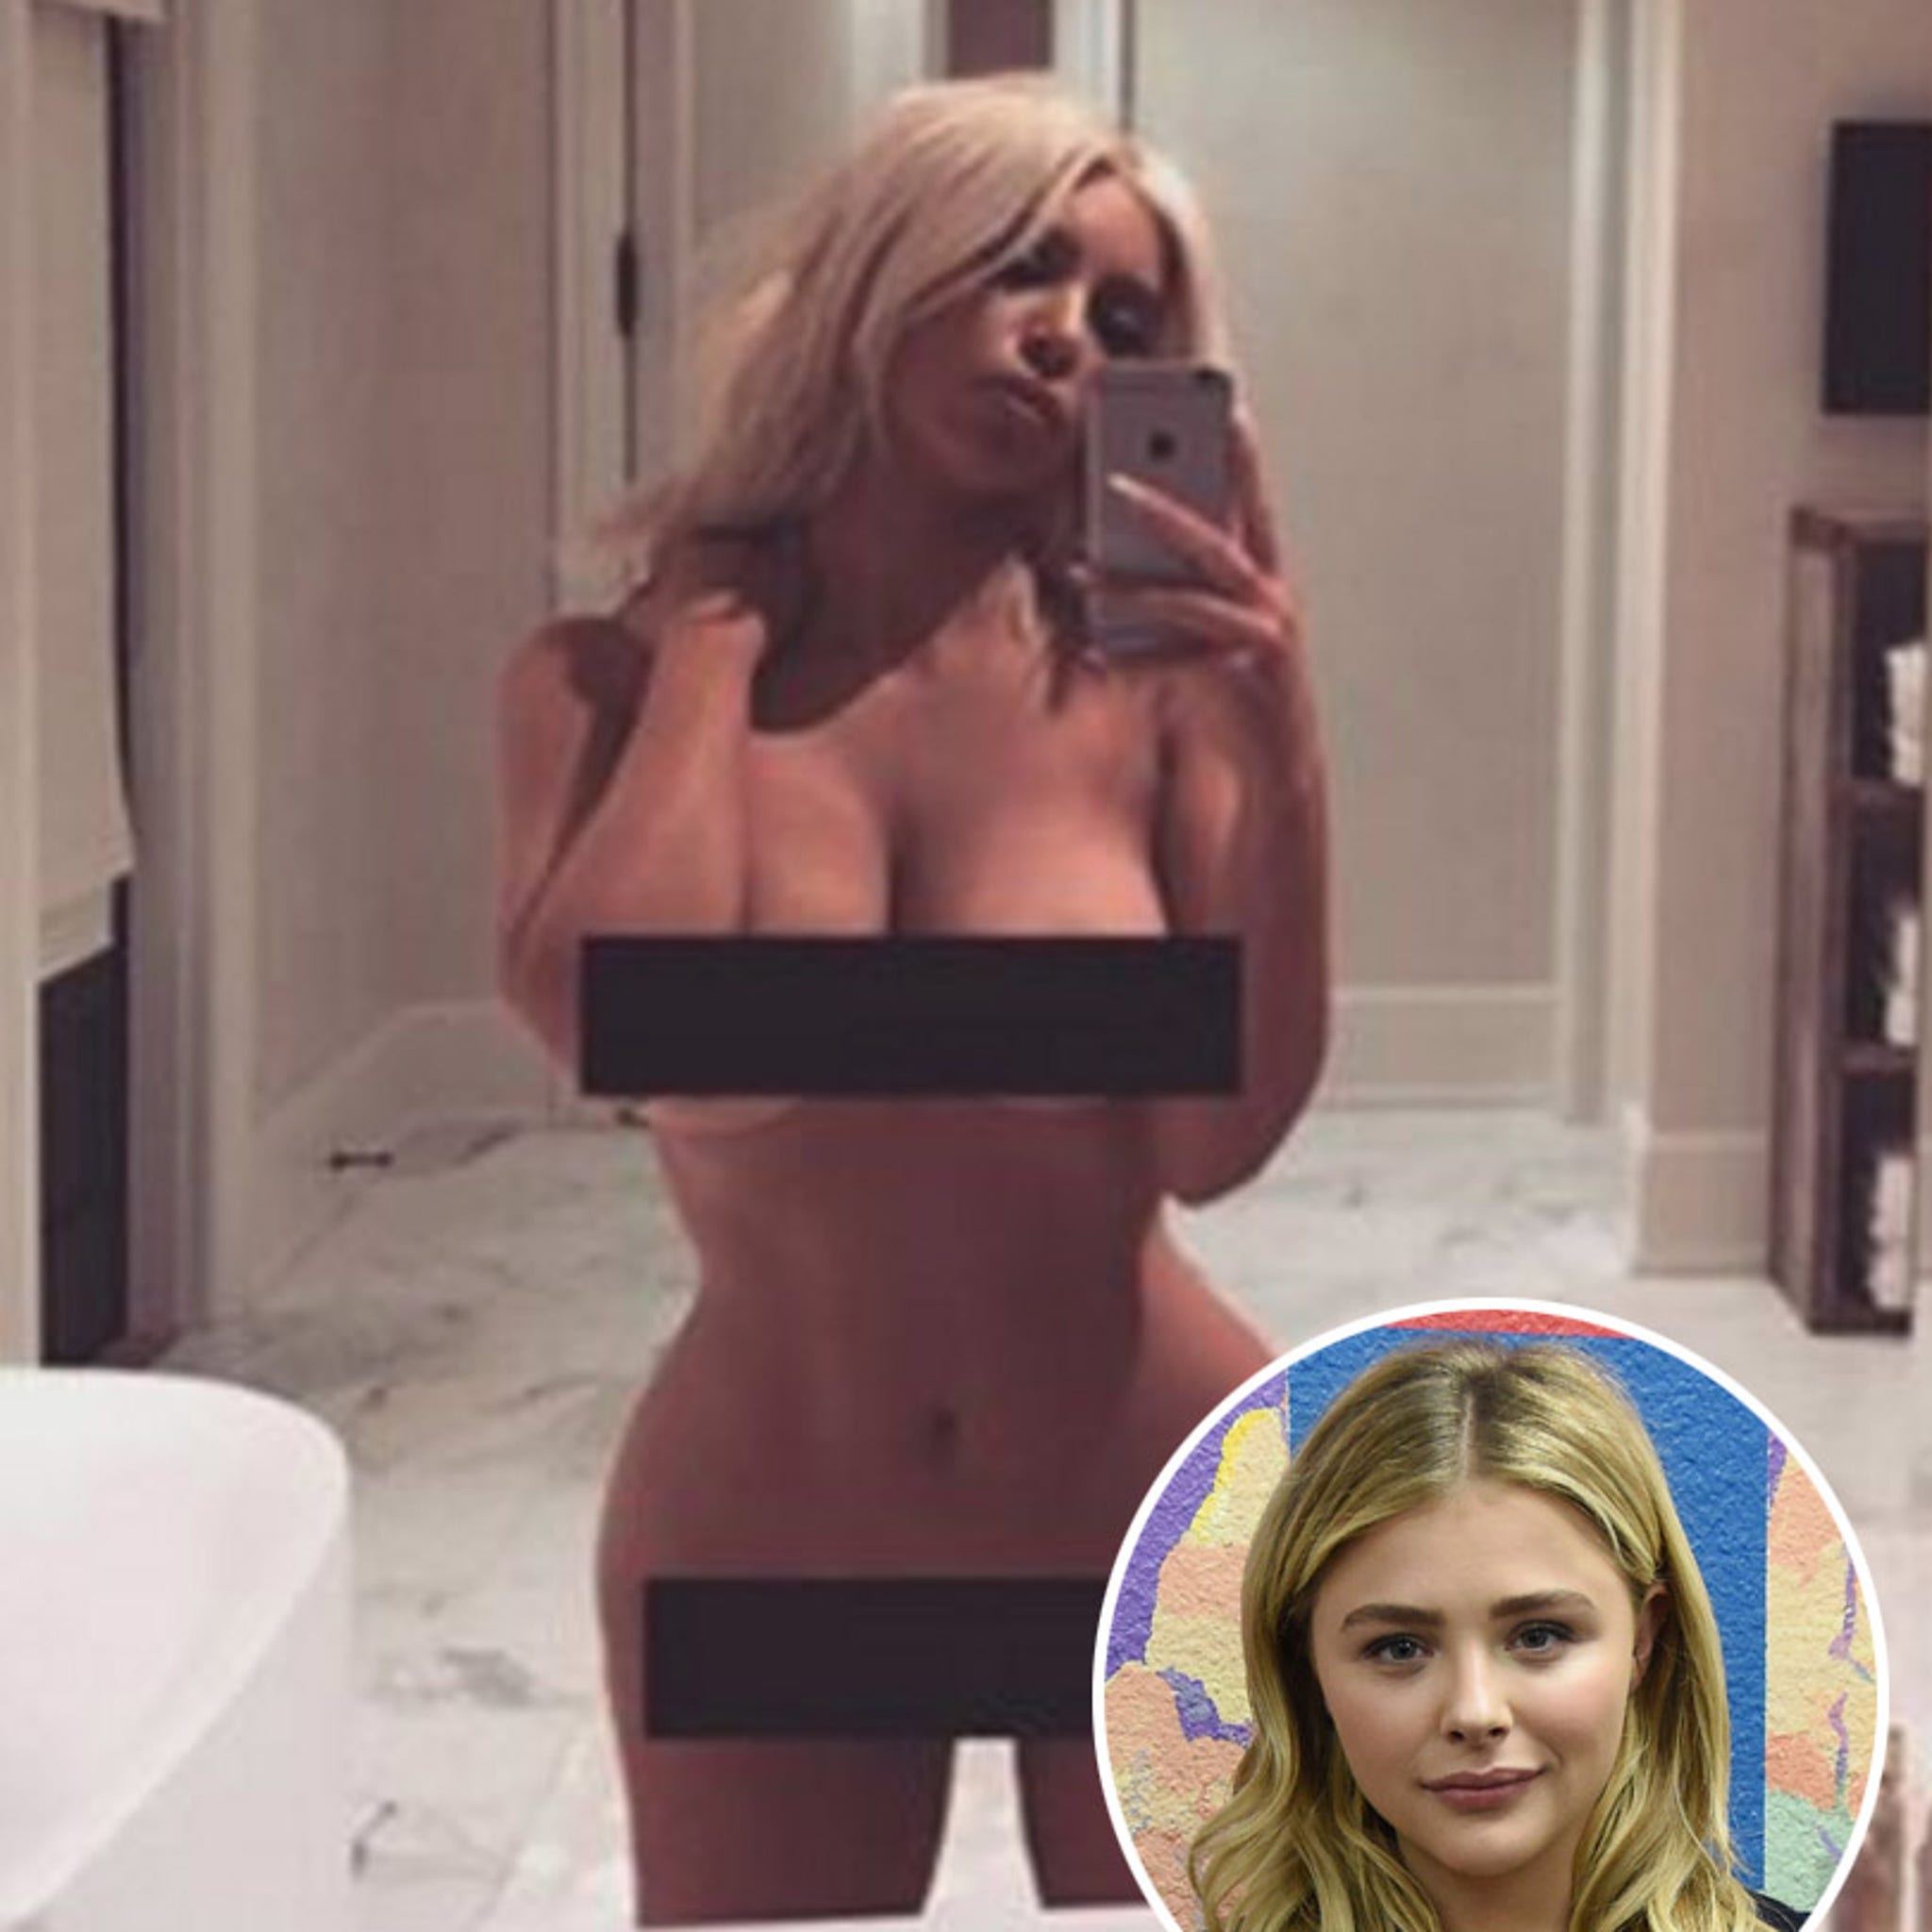 clarence garrison recommends chloe grace moretz ever been nude pic